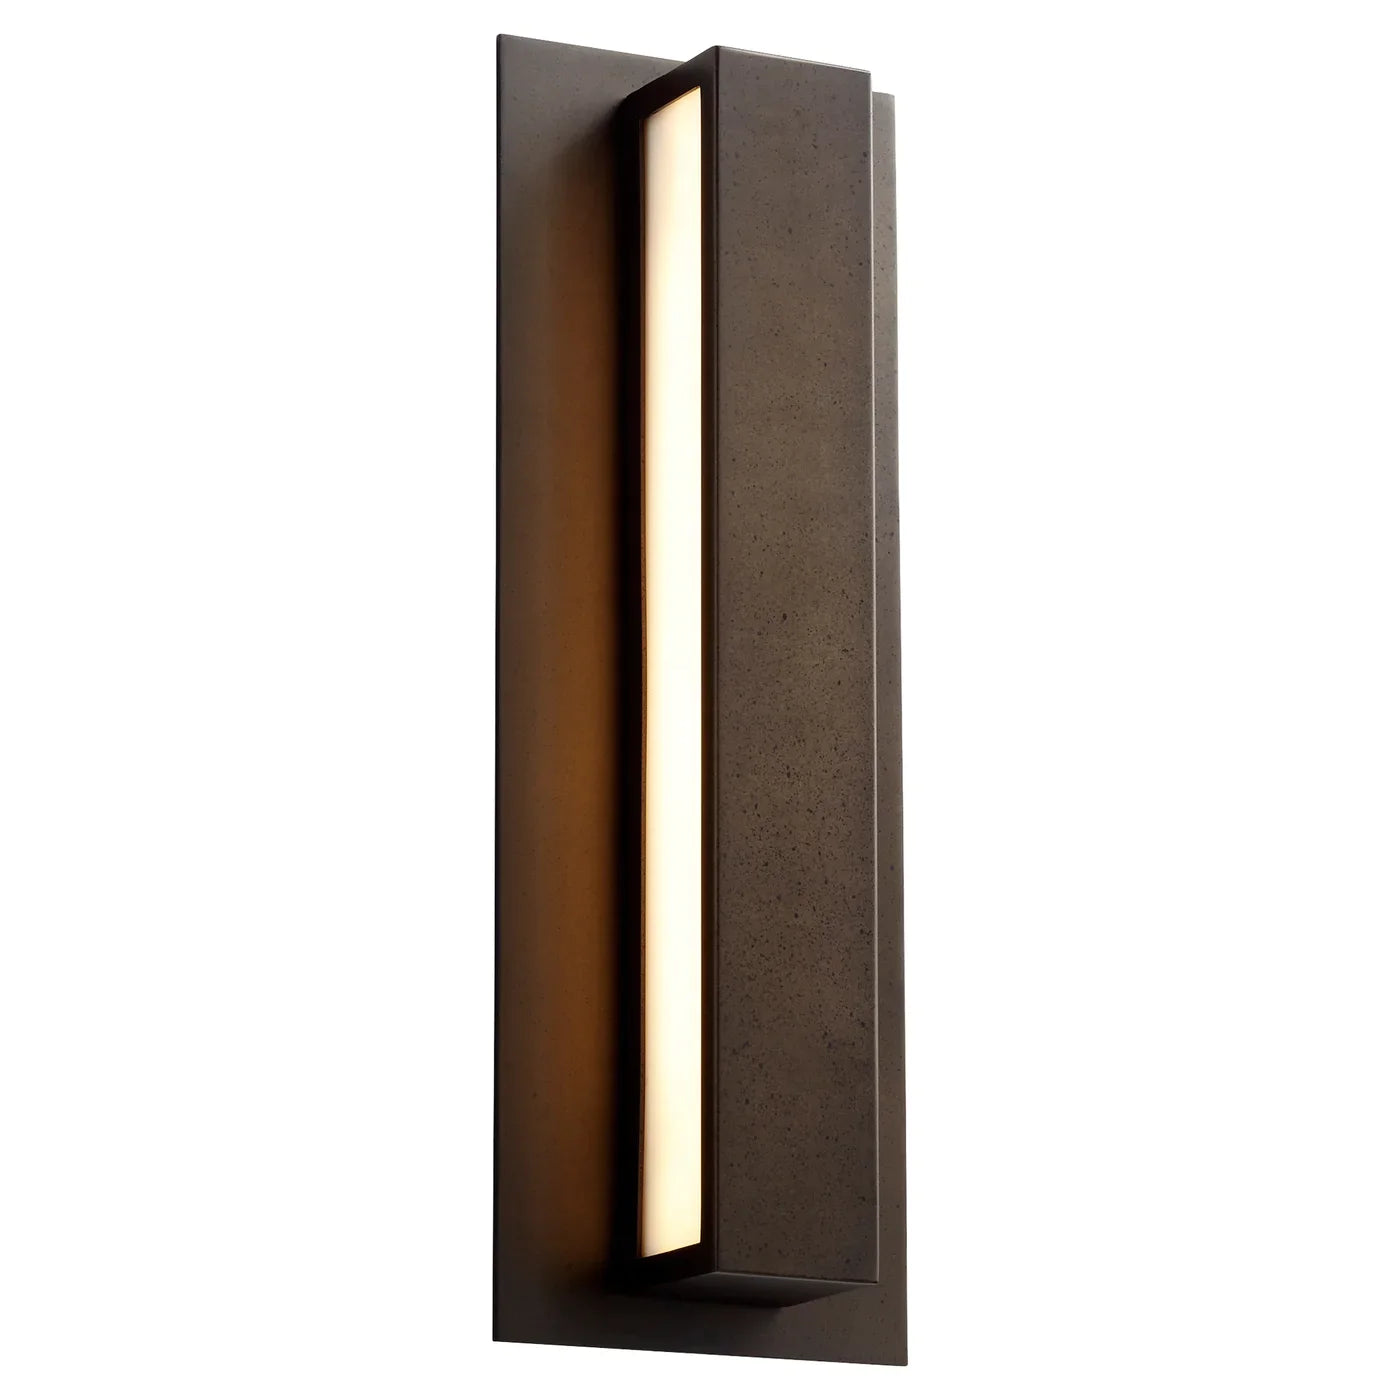 Oxygen Alcor 3-532-22 LED Wall Light Fixture 13 Inch - Oiled Bronze